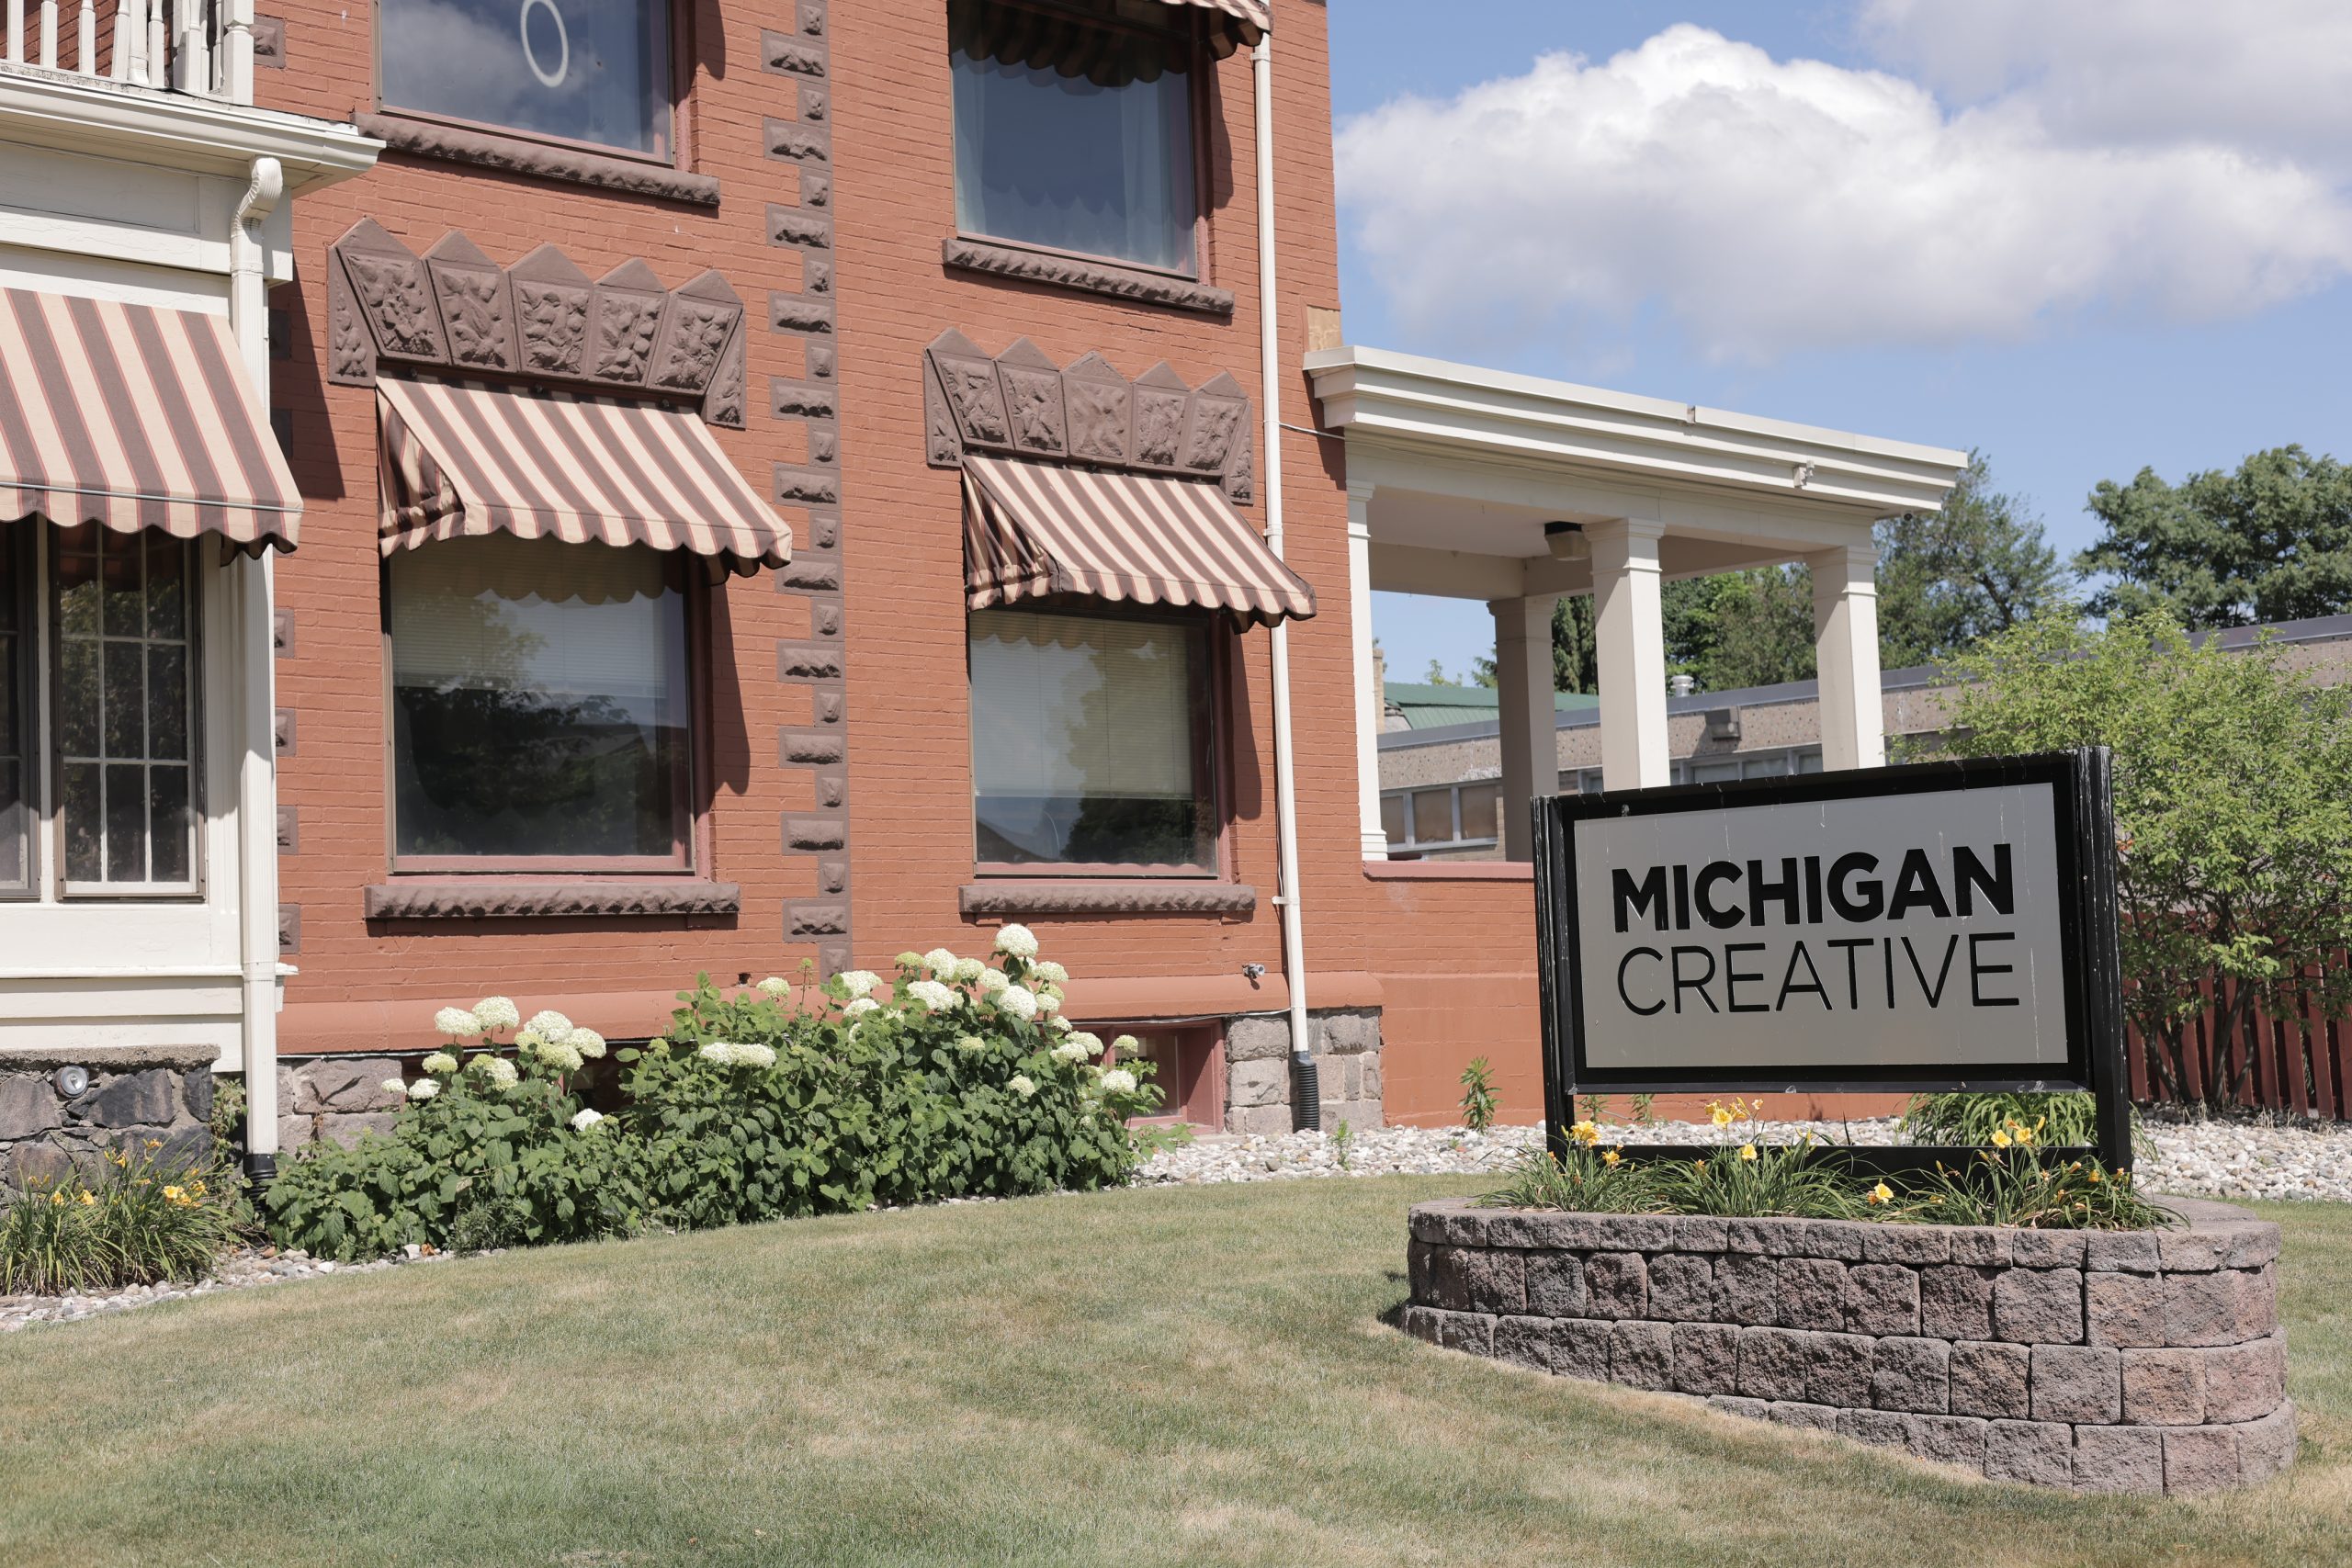 Michigan Creative Building: A Marketing and Branding Agency That Listens